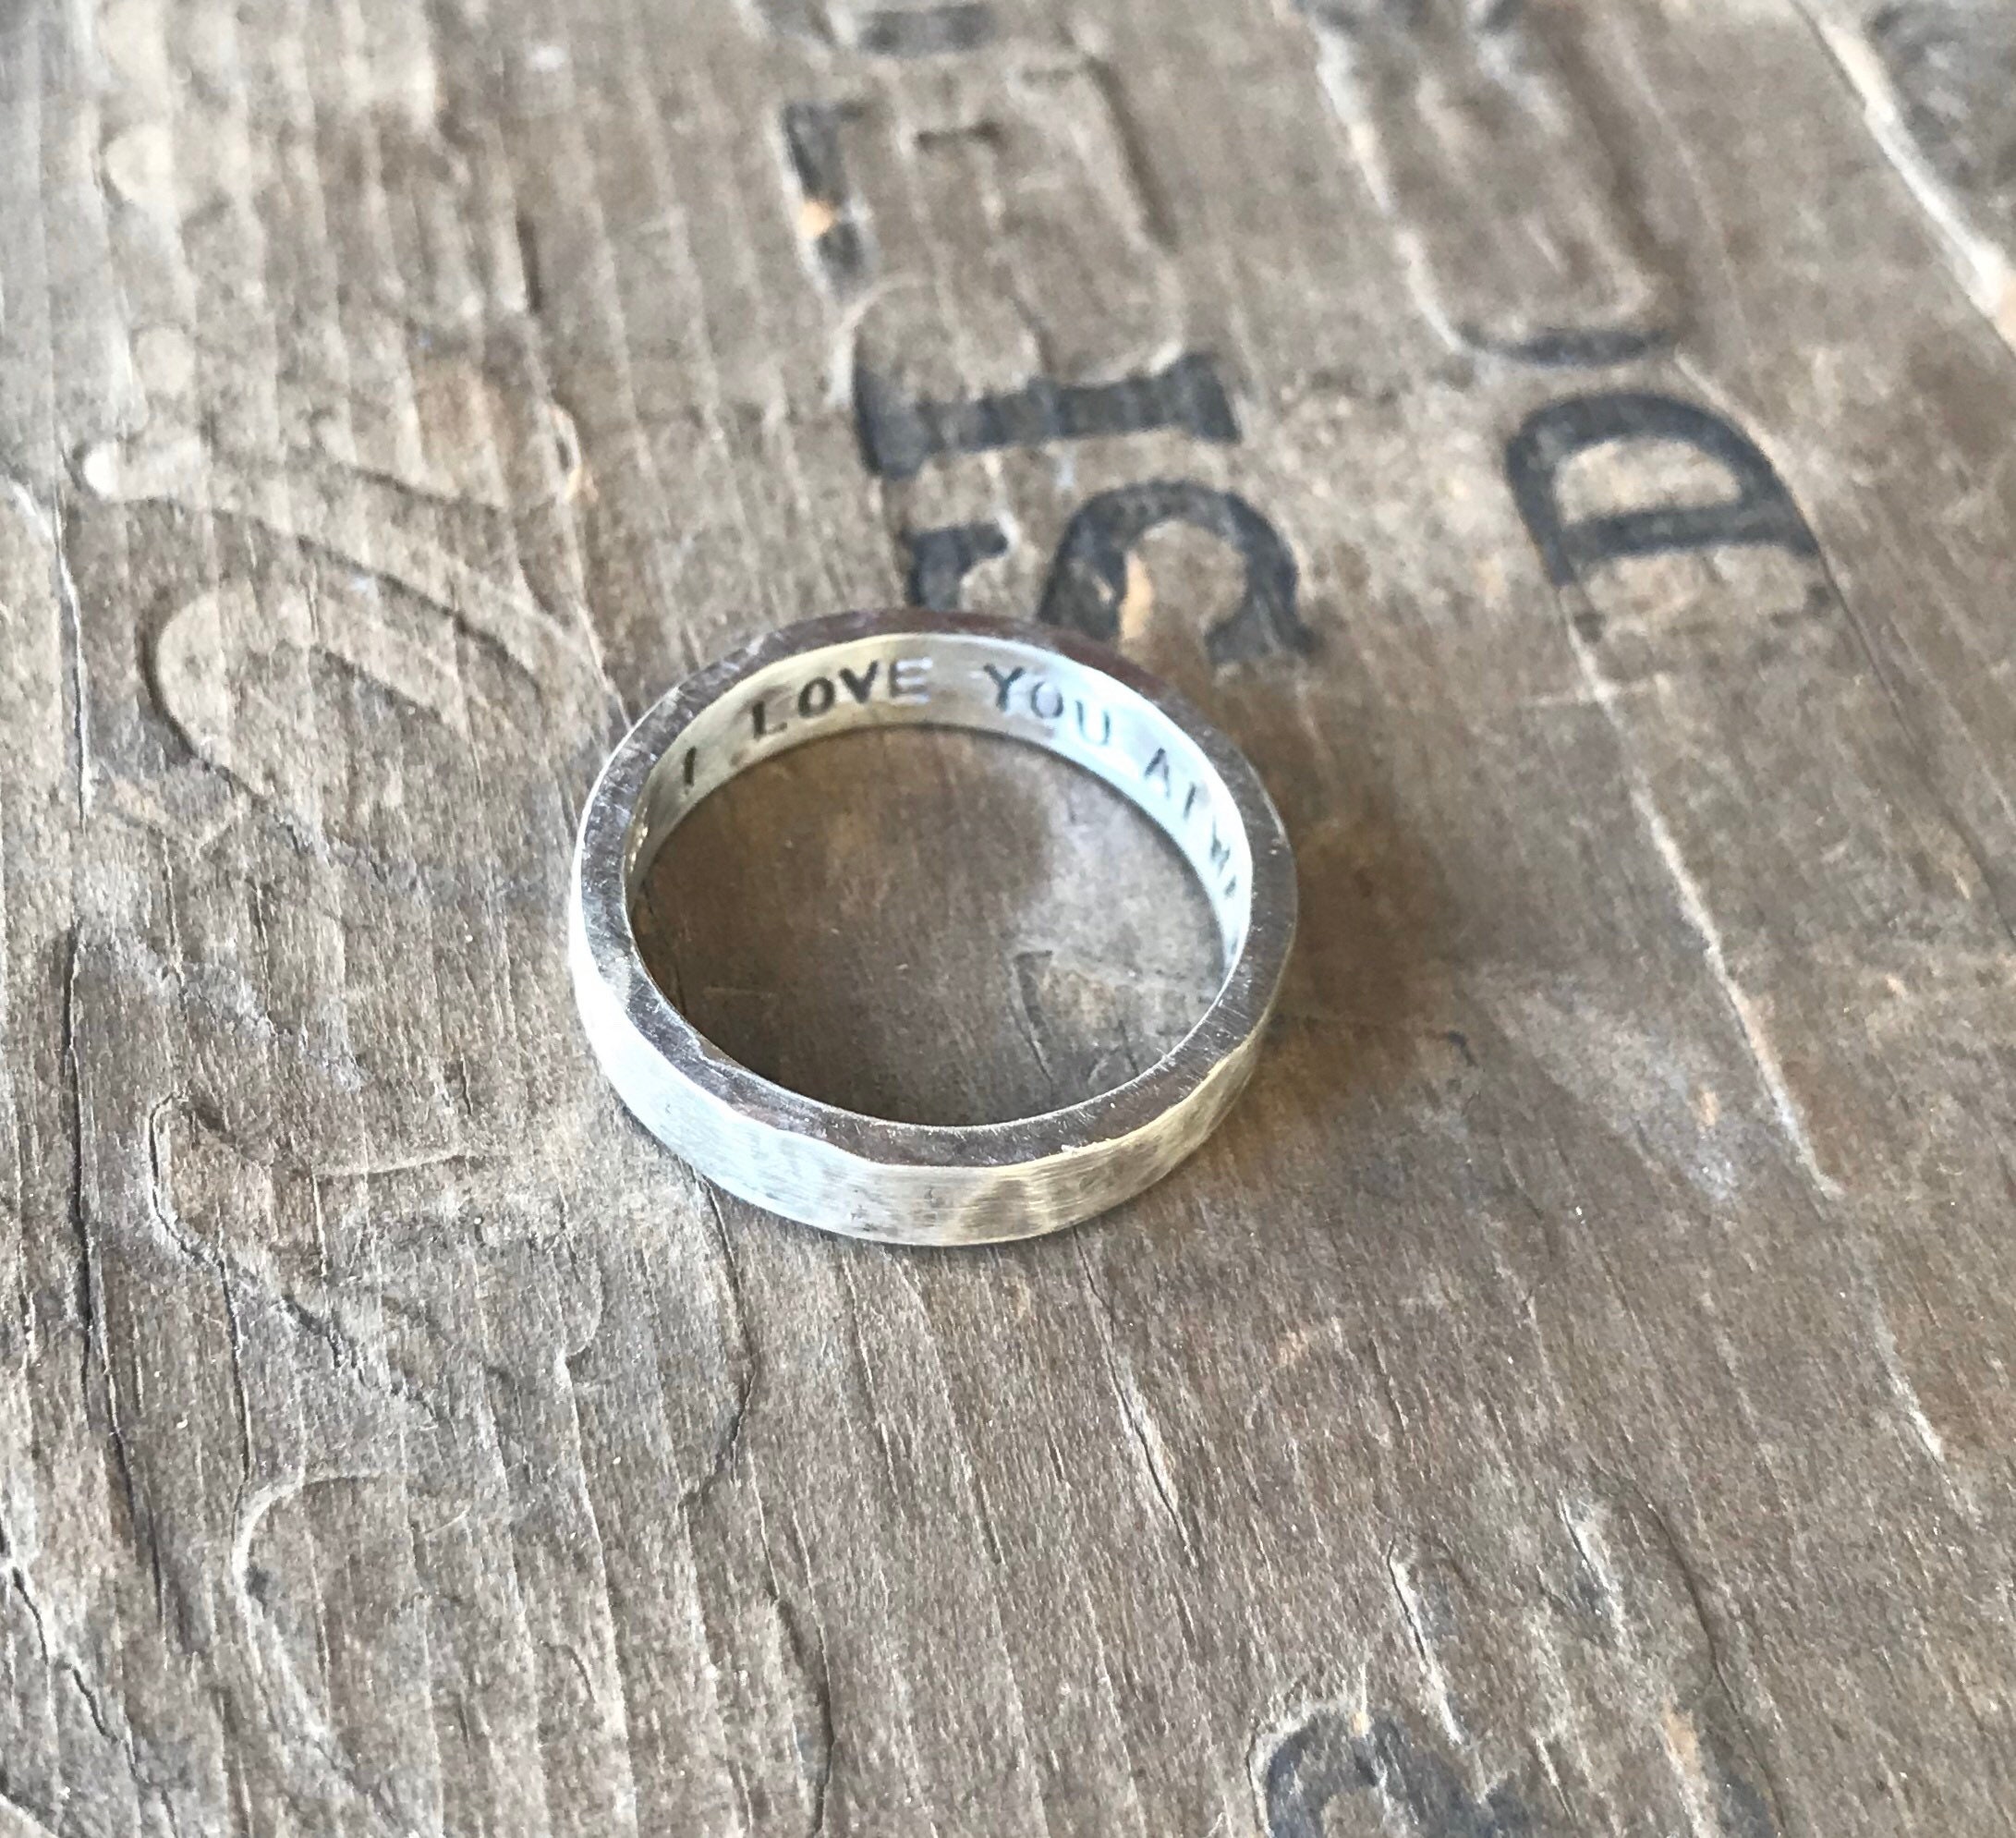 Ring Resizing: What You Need to Know Before You Resize Near You